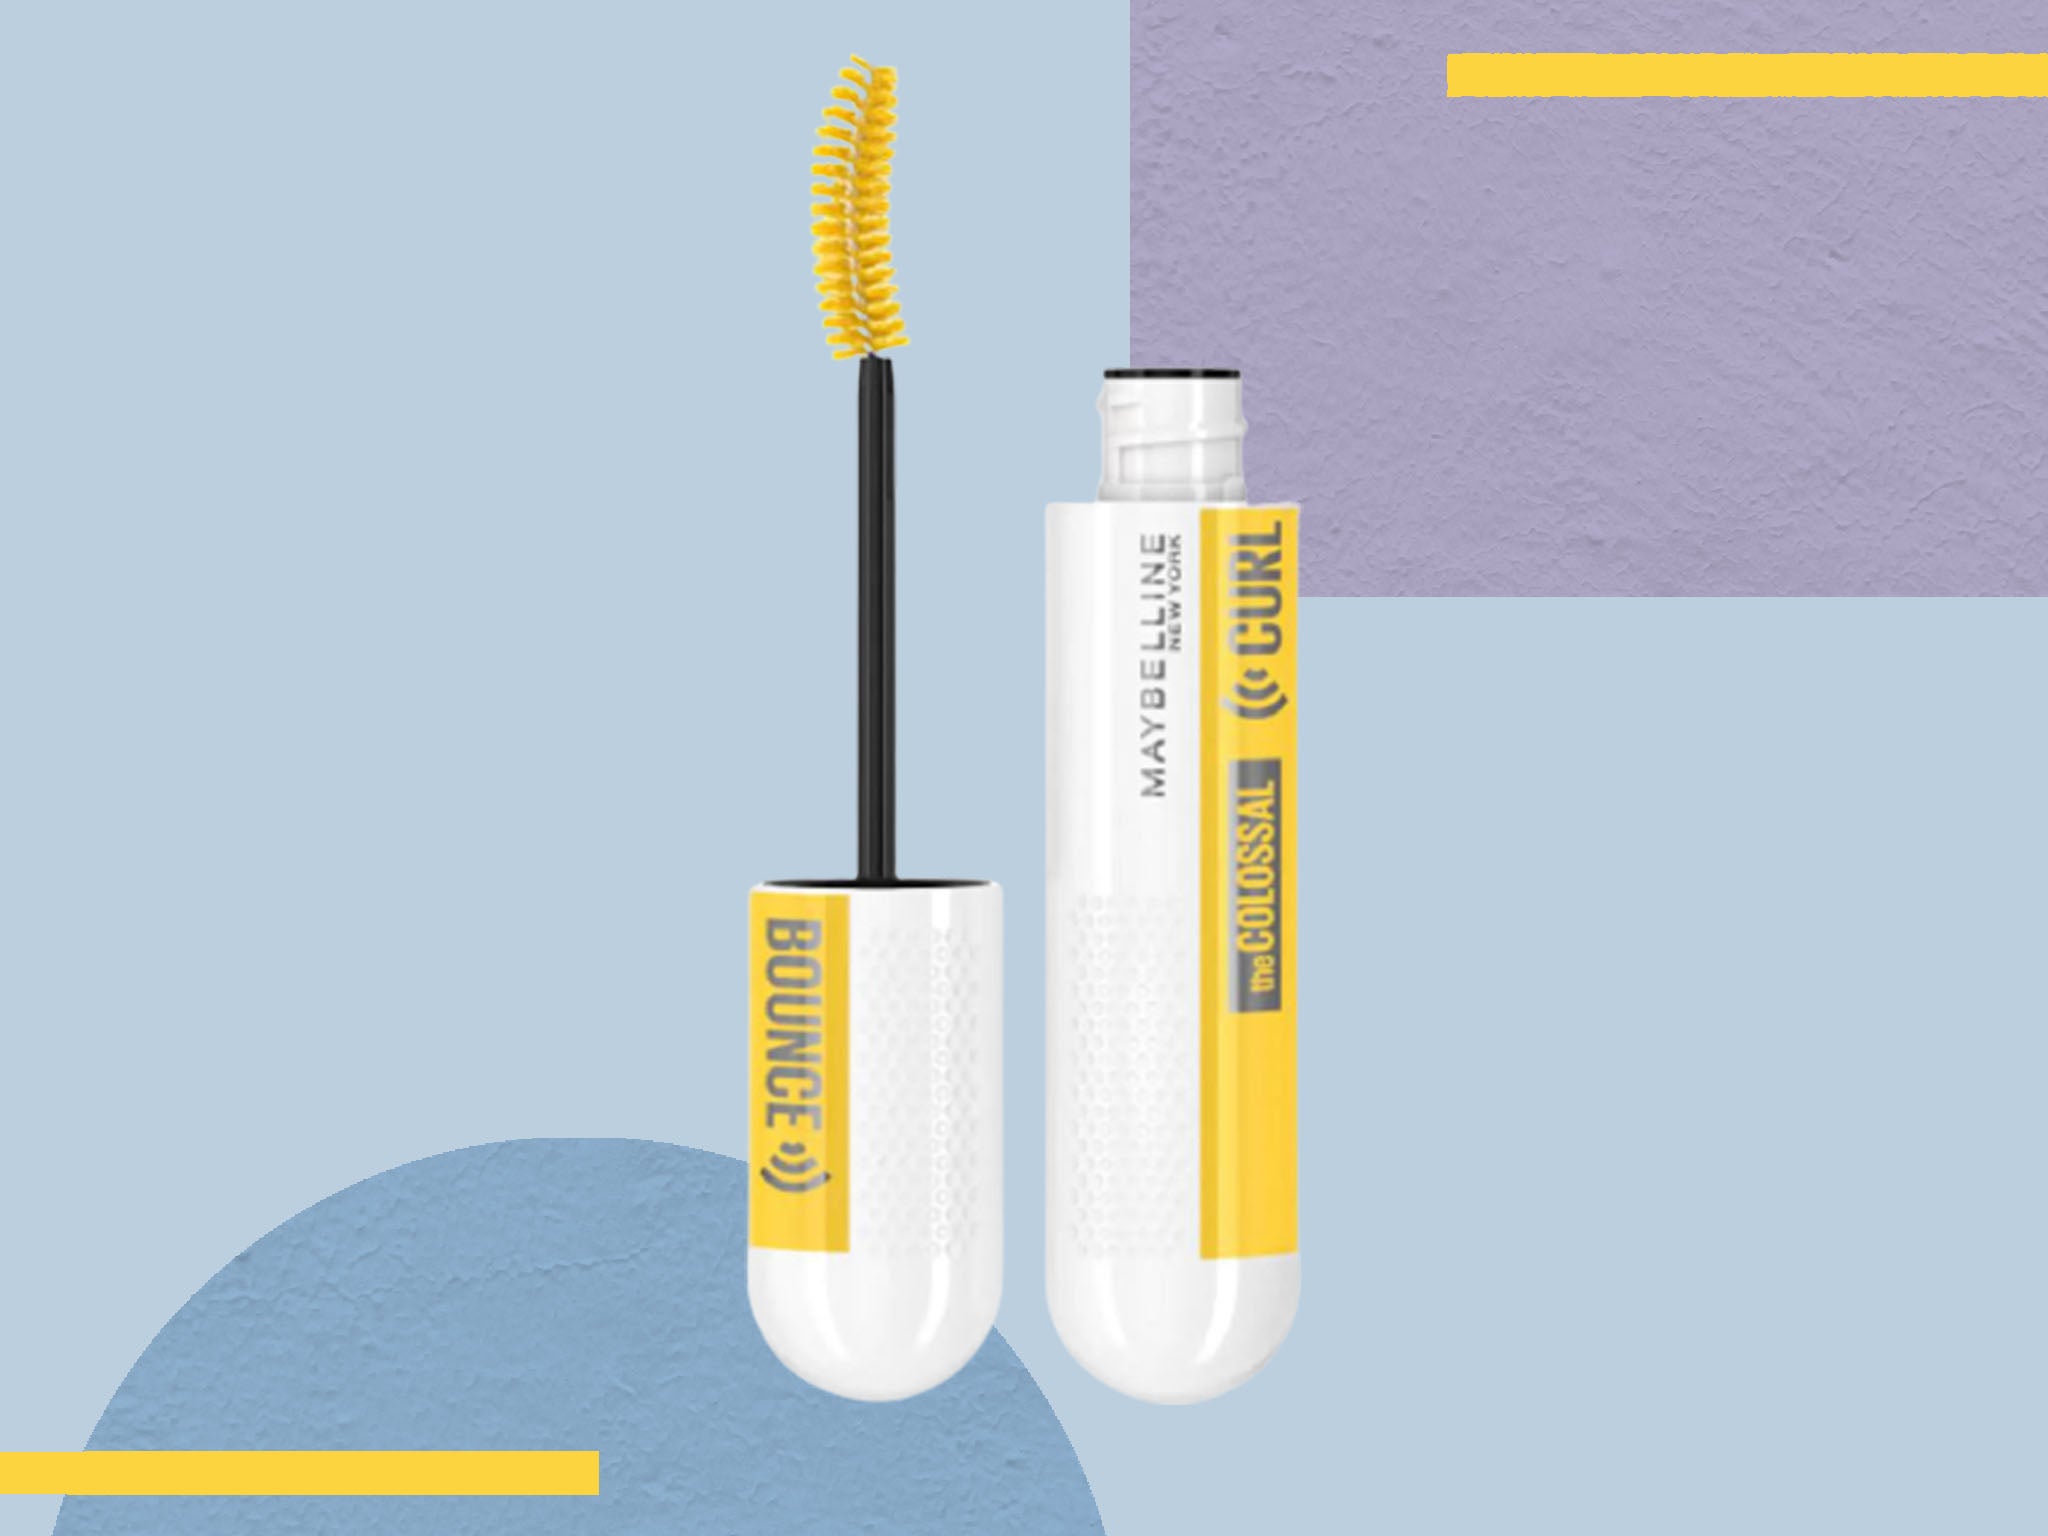 We tested the latest formula for five days straight to see how it fared on our stubborn lashes